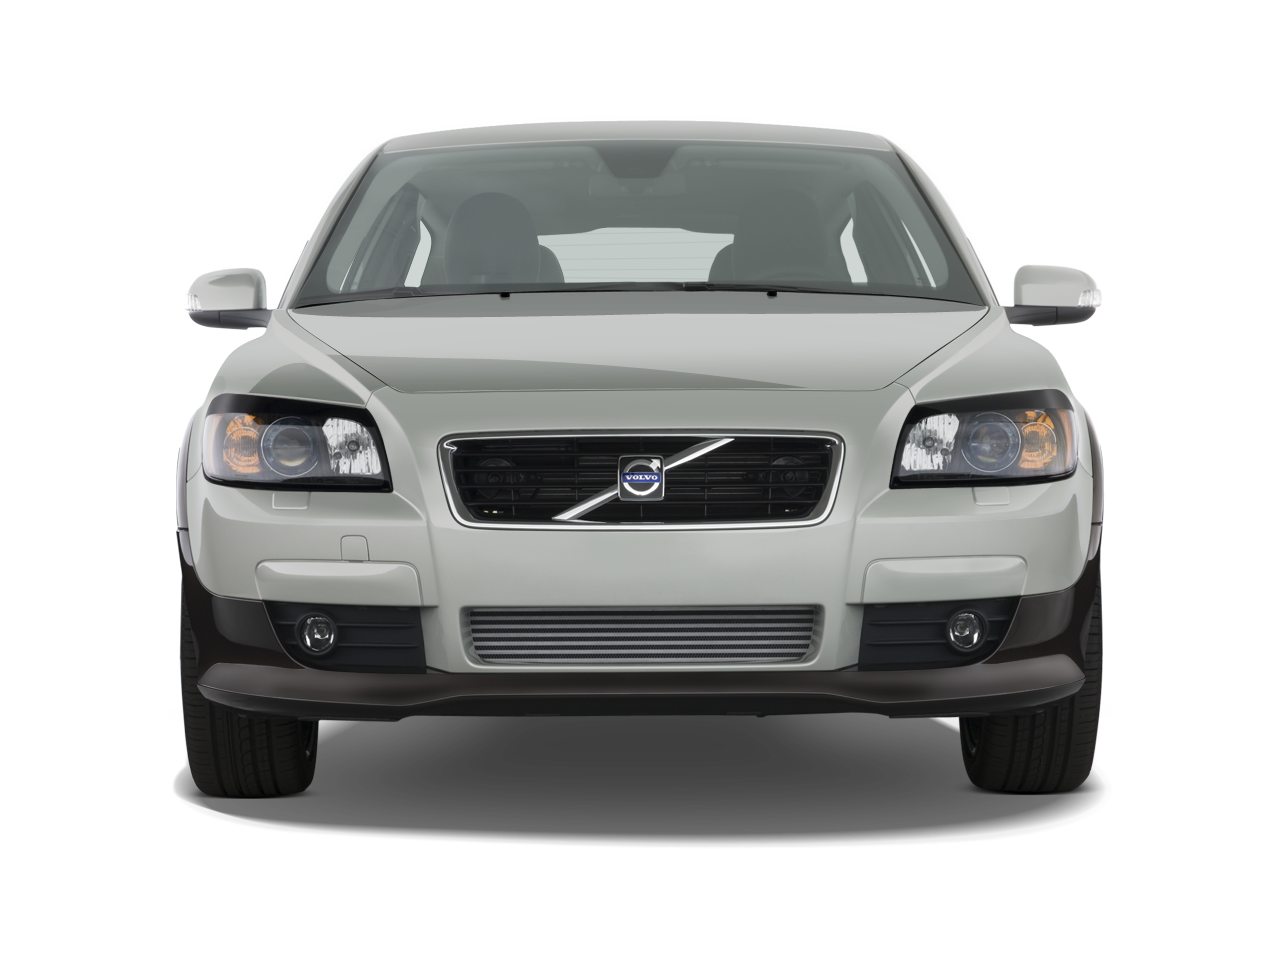 2009 volvo c30 t5 review